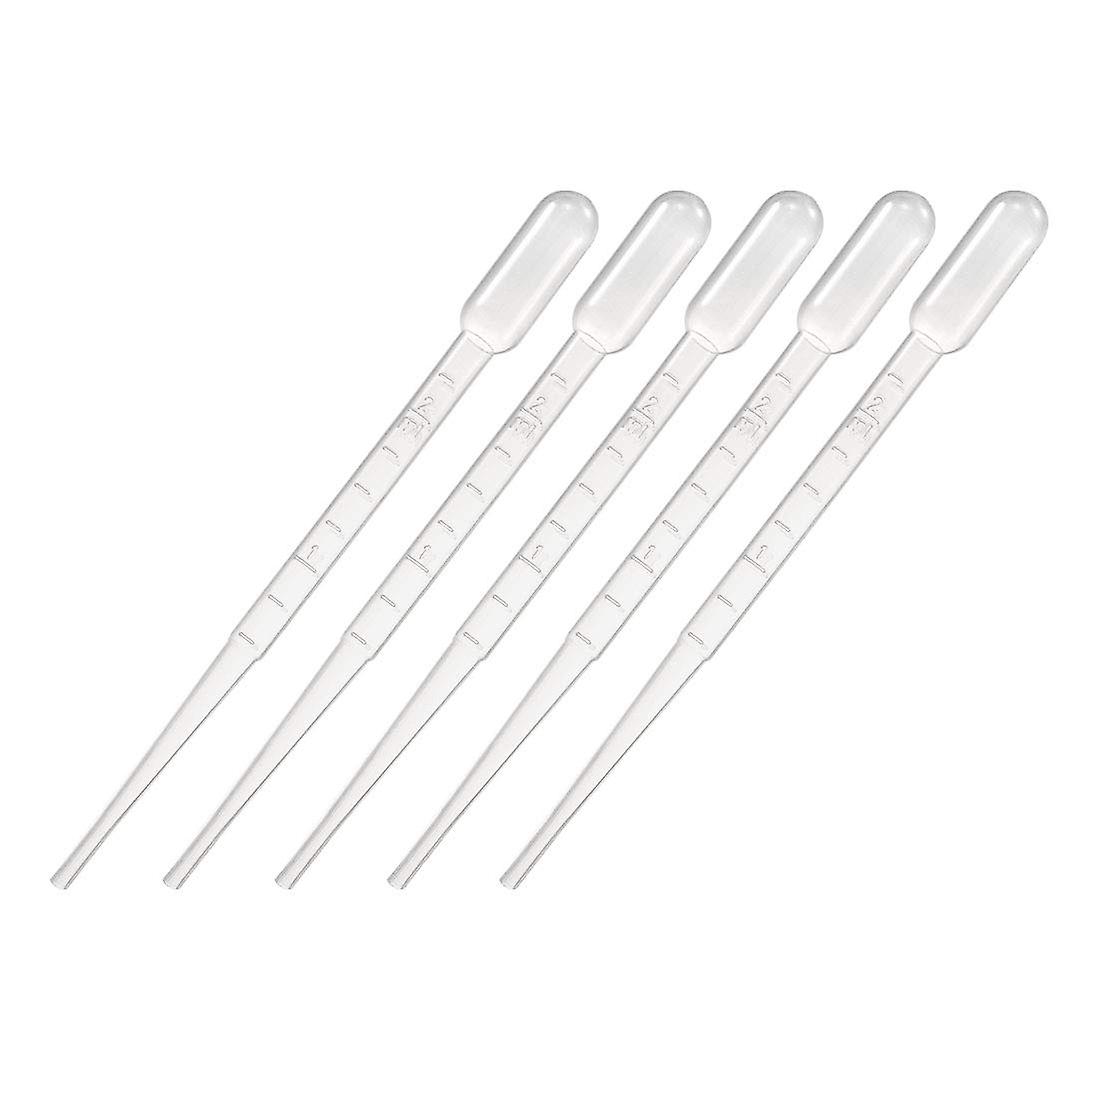 Plastic Pasteur Pipettes 3ml grads with 0.5ml inc. (Pack of 100) product photo